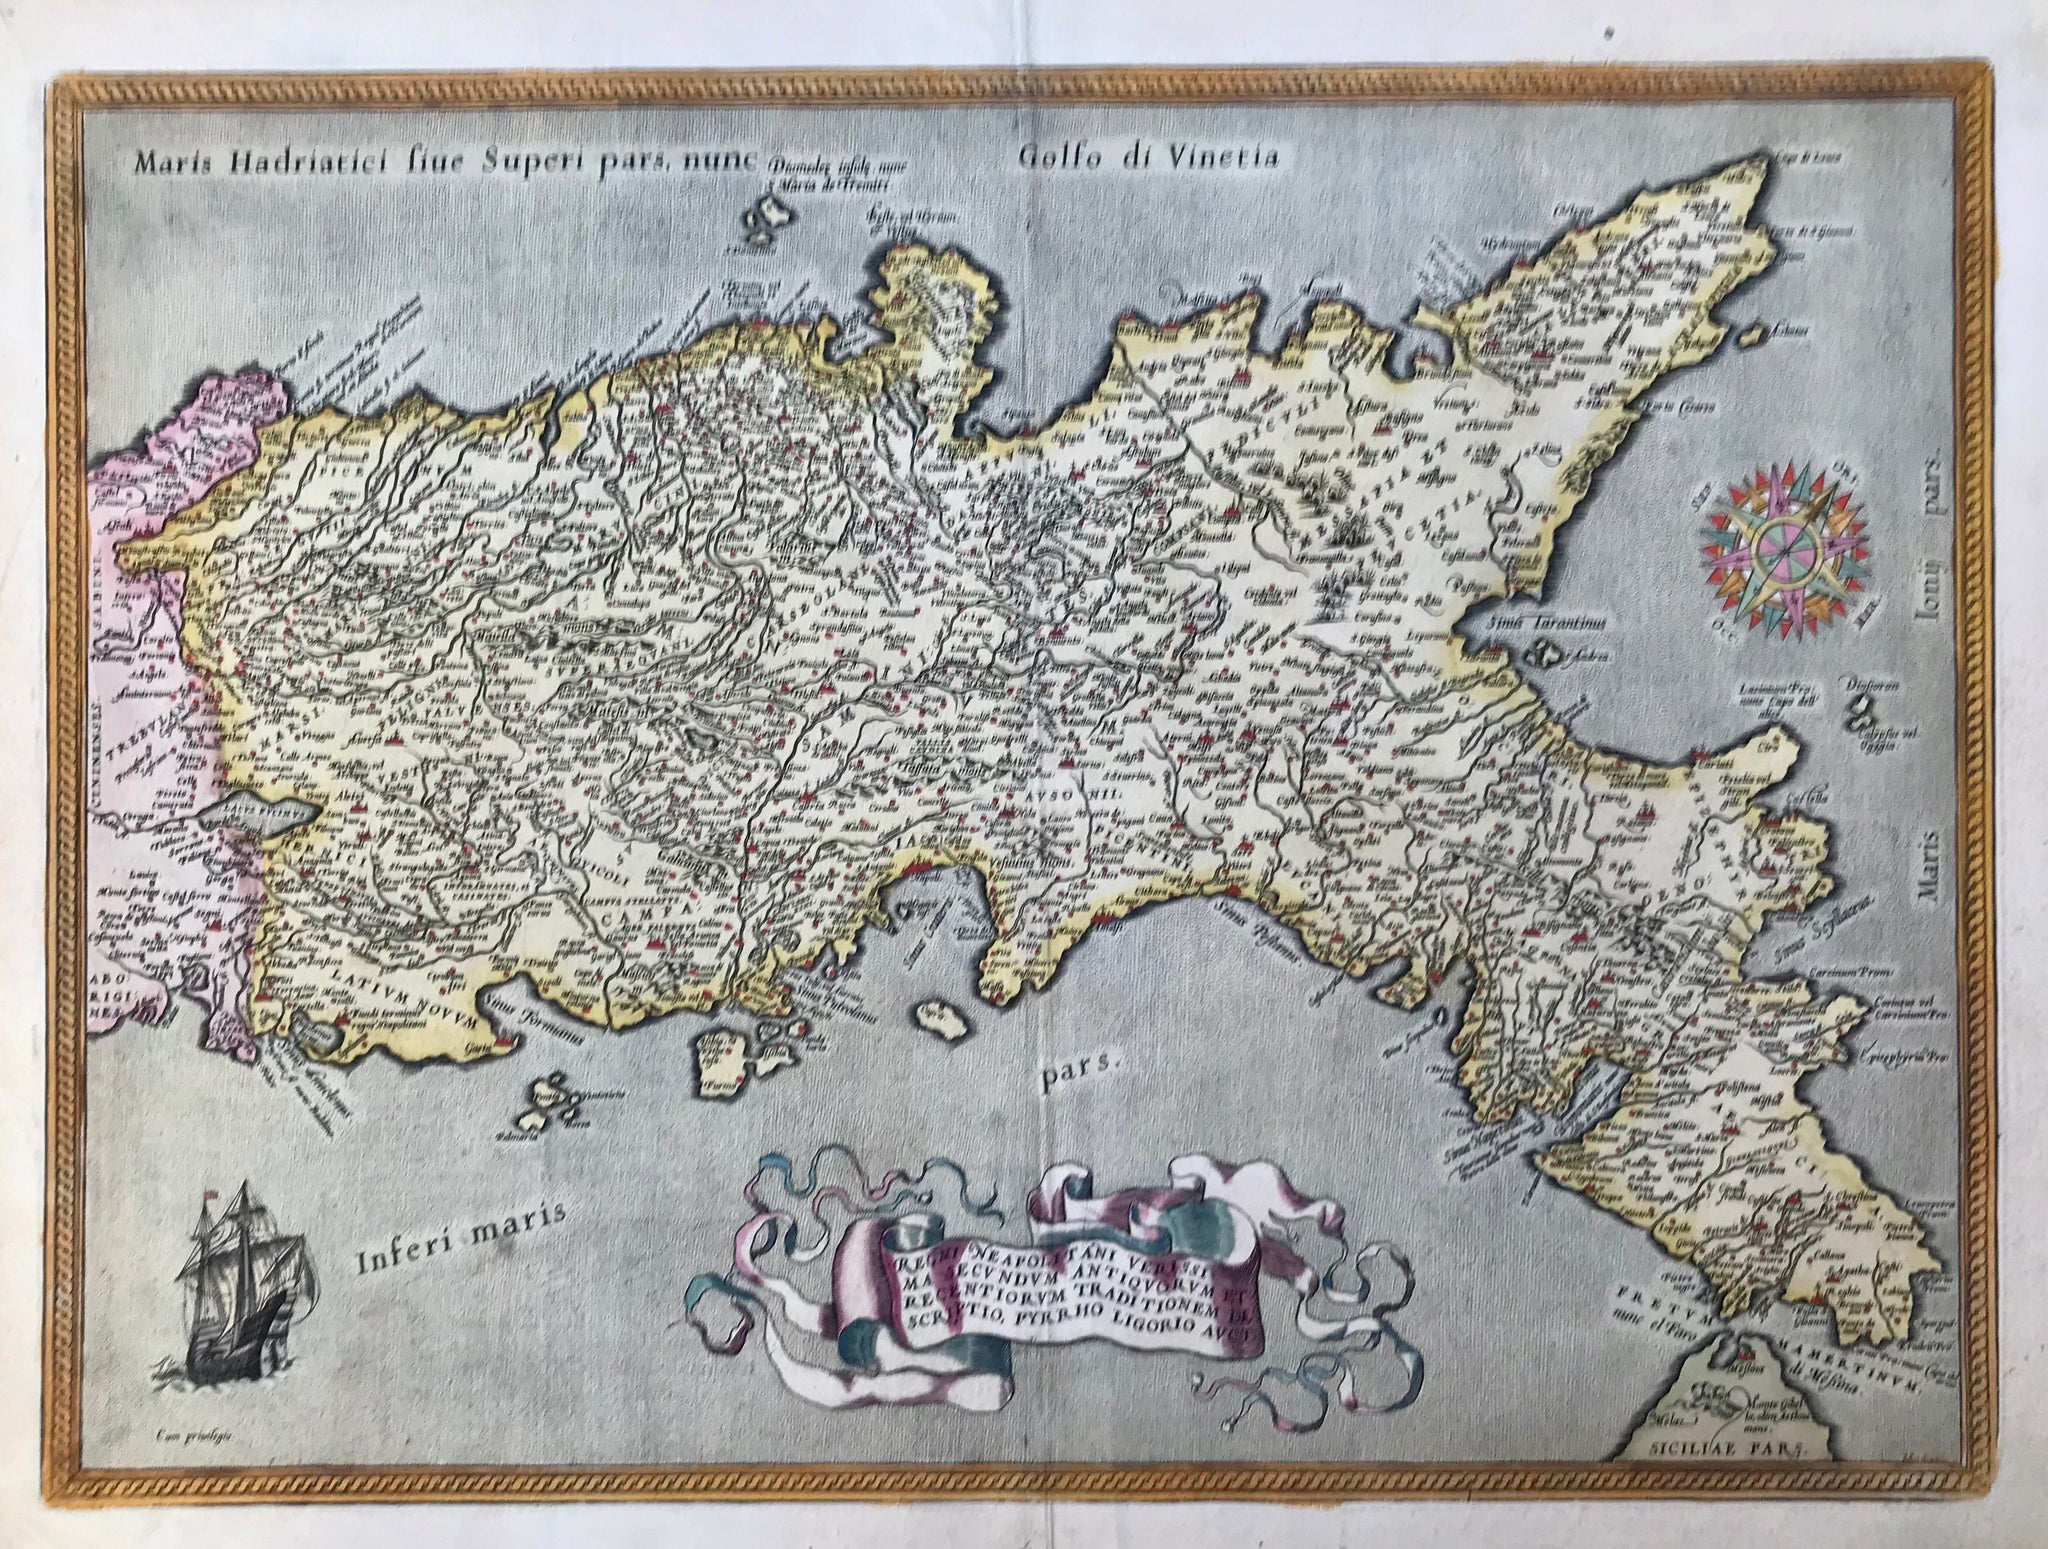 "Regni Neapolitani Verissima Secundum Antiquorum et Recentiorum Traditionem Descriptio". Copper etching by Pyrrho Ligorio. Published by Abraham Ortelius in his famous atlas ãTheatrum Orbis Terrarum". Antwerp, 1587. Original hand coloring. Verso: Text in Latin.  This east-oriented map shows southern Italy = The Kingdom of Naples including the eastern tip of Sicily with Messina.